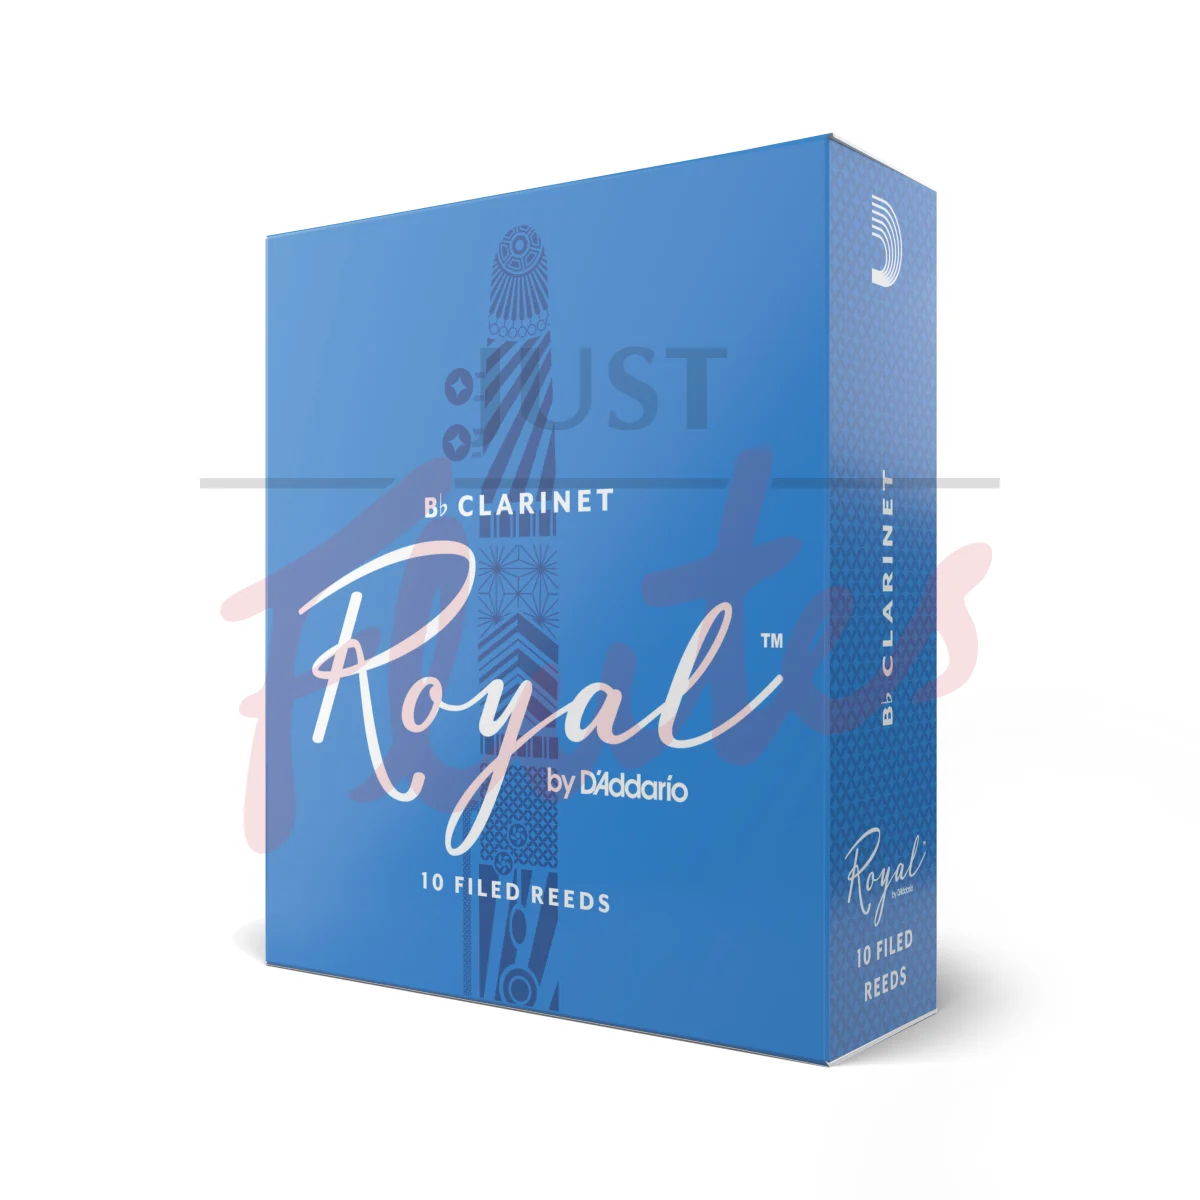 Royal by D'Addario RCB1040 Clarinet Reeds Strength 4, 10-pack